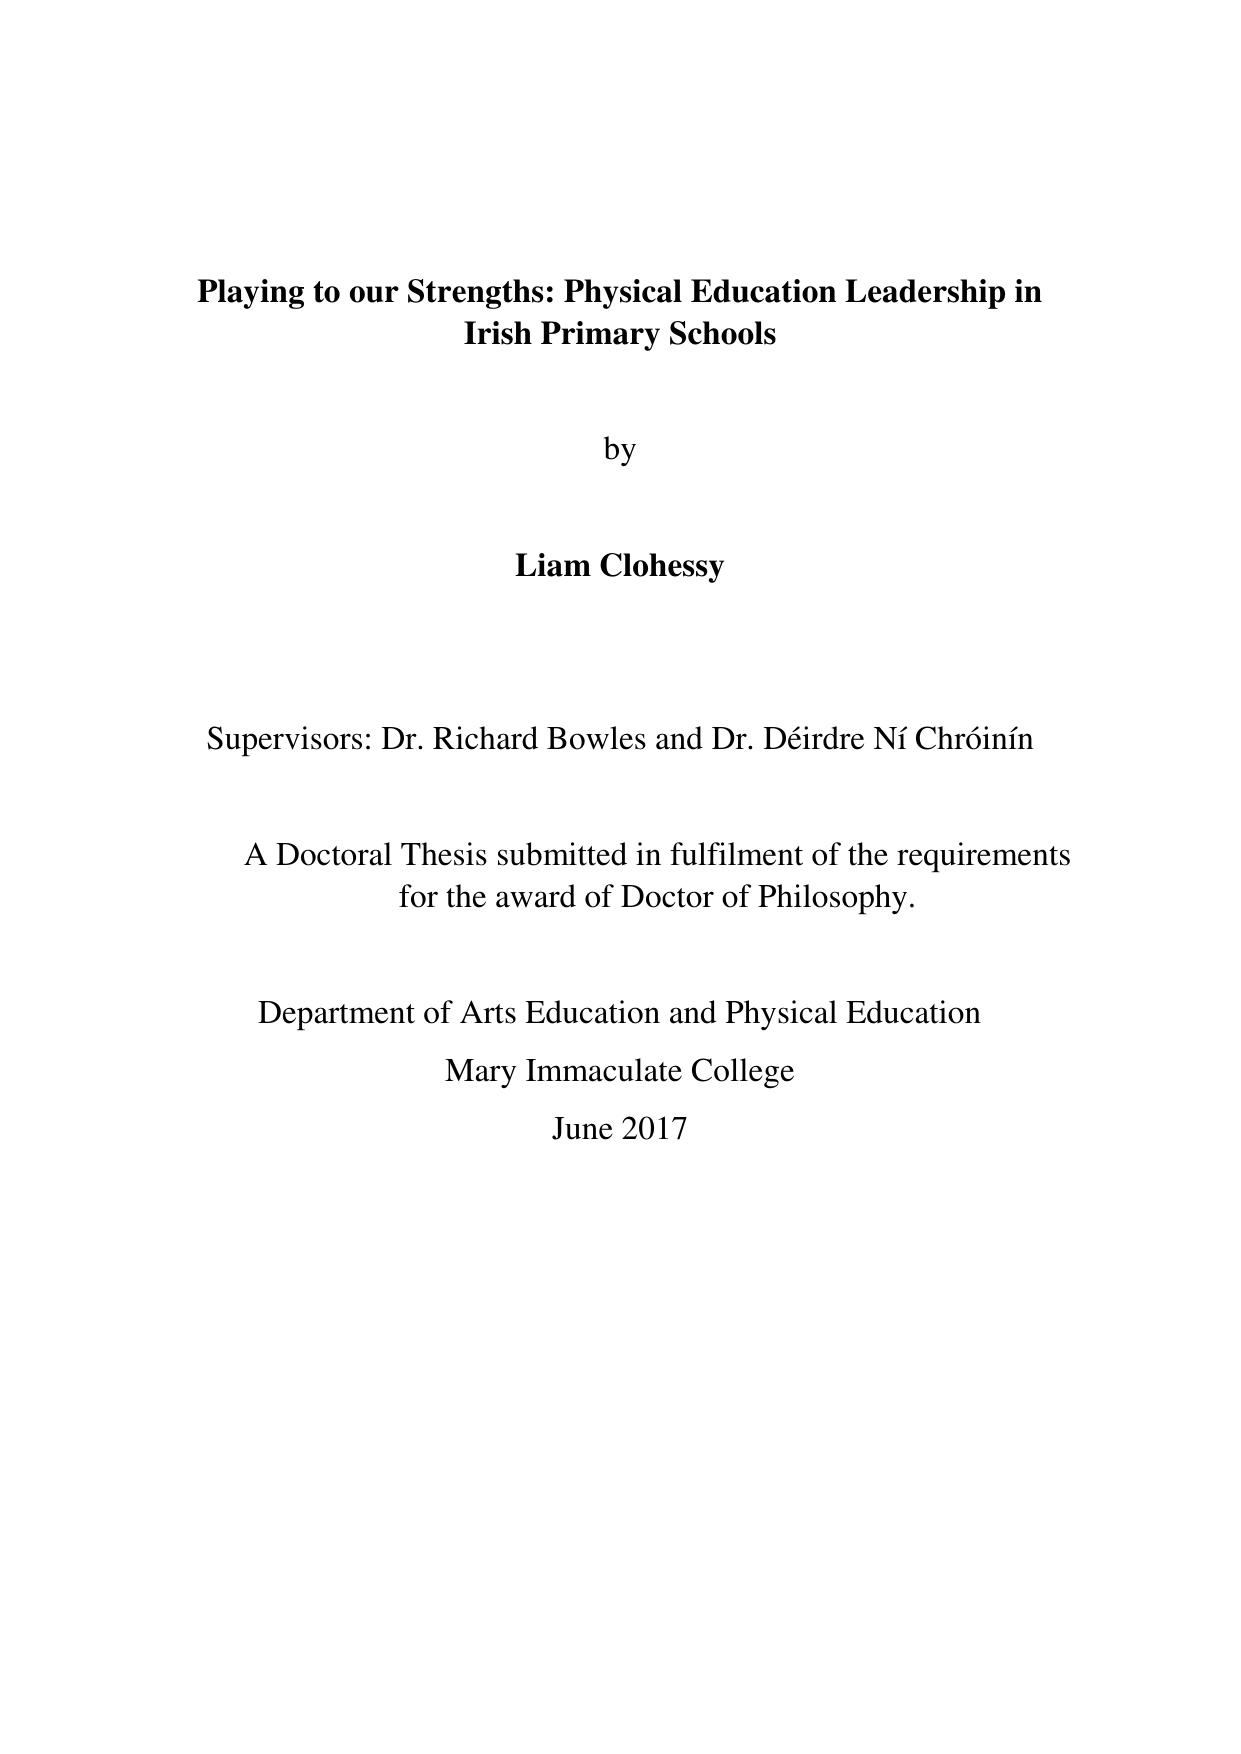 Playing to our Strengths Physical Education Leadership in Irish Primary Schools. PhD 2017